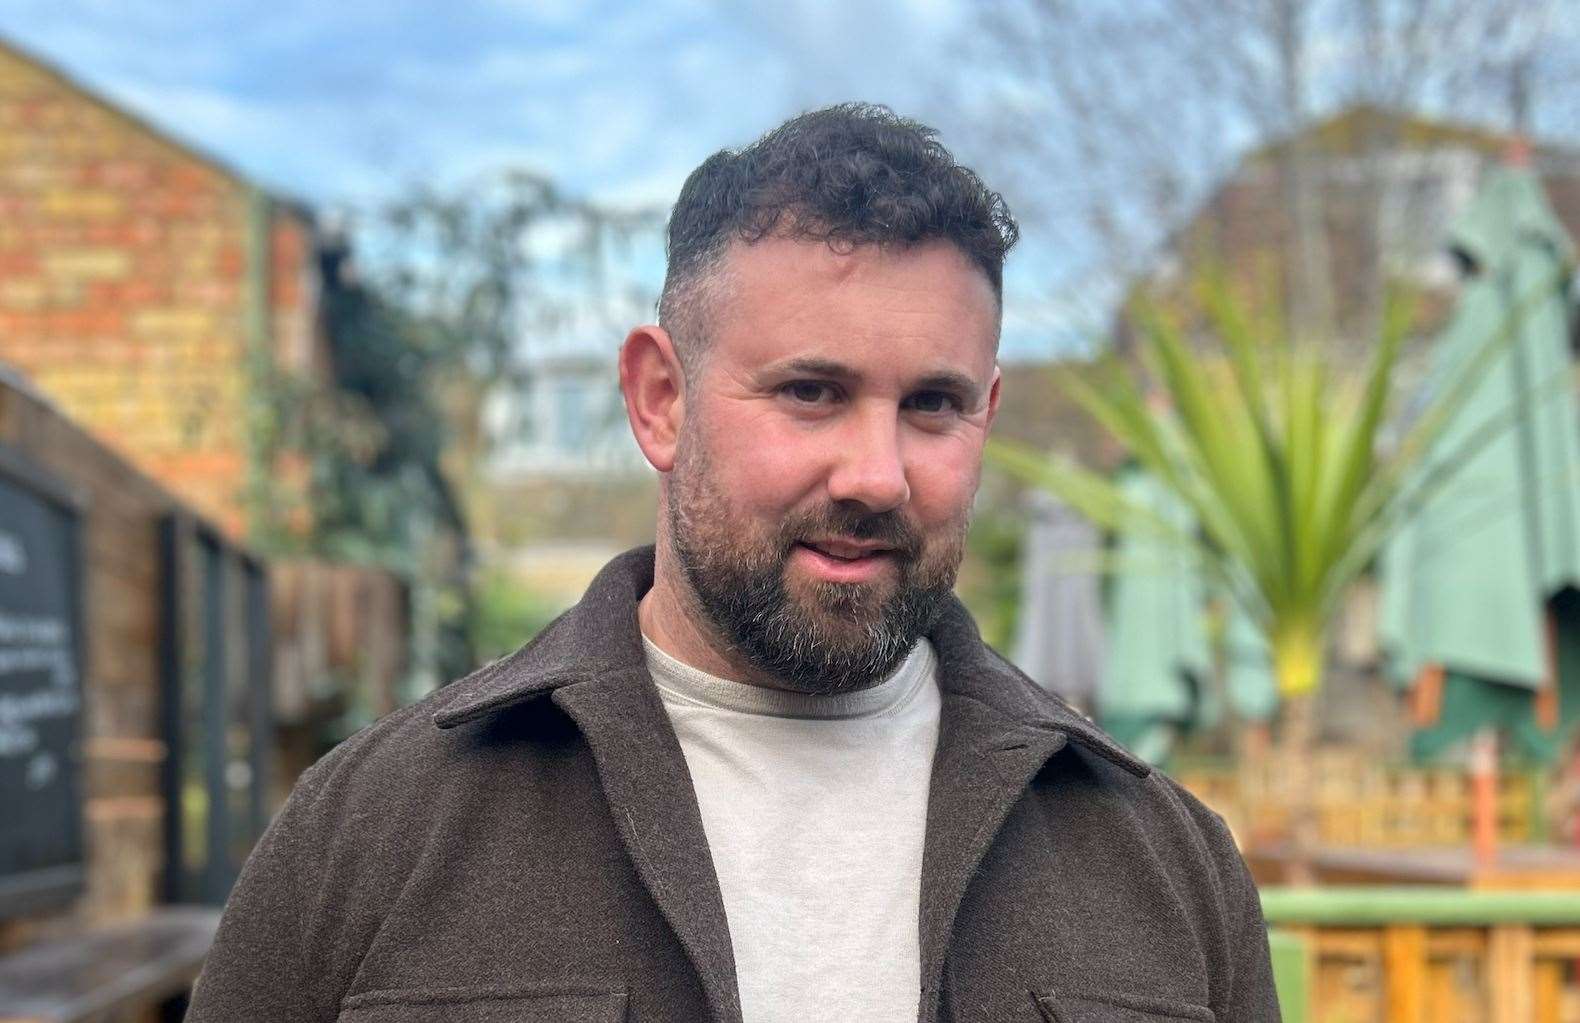 Ivy's of Hythe's owner and chef William Dunlop says the extended service hours are so that his service staff would not need to hurry people as they eat. Picture: William Dunlop